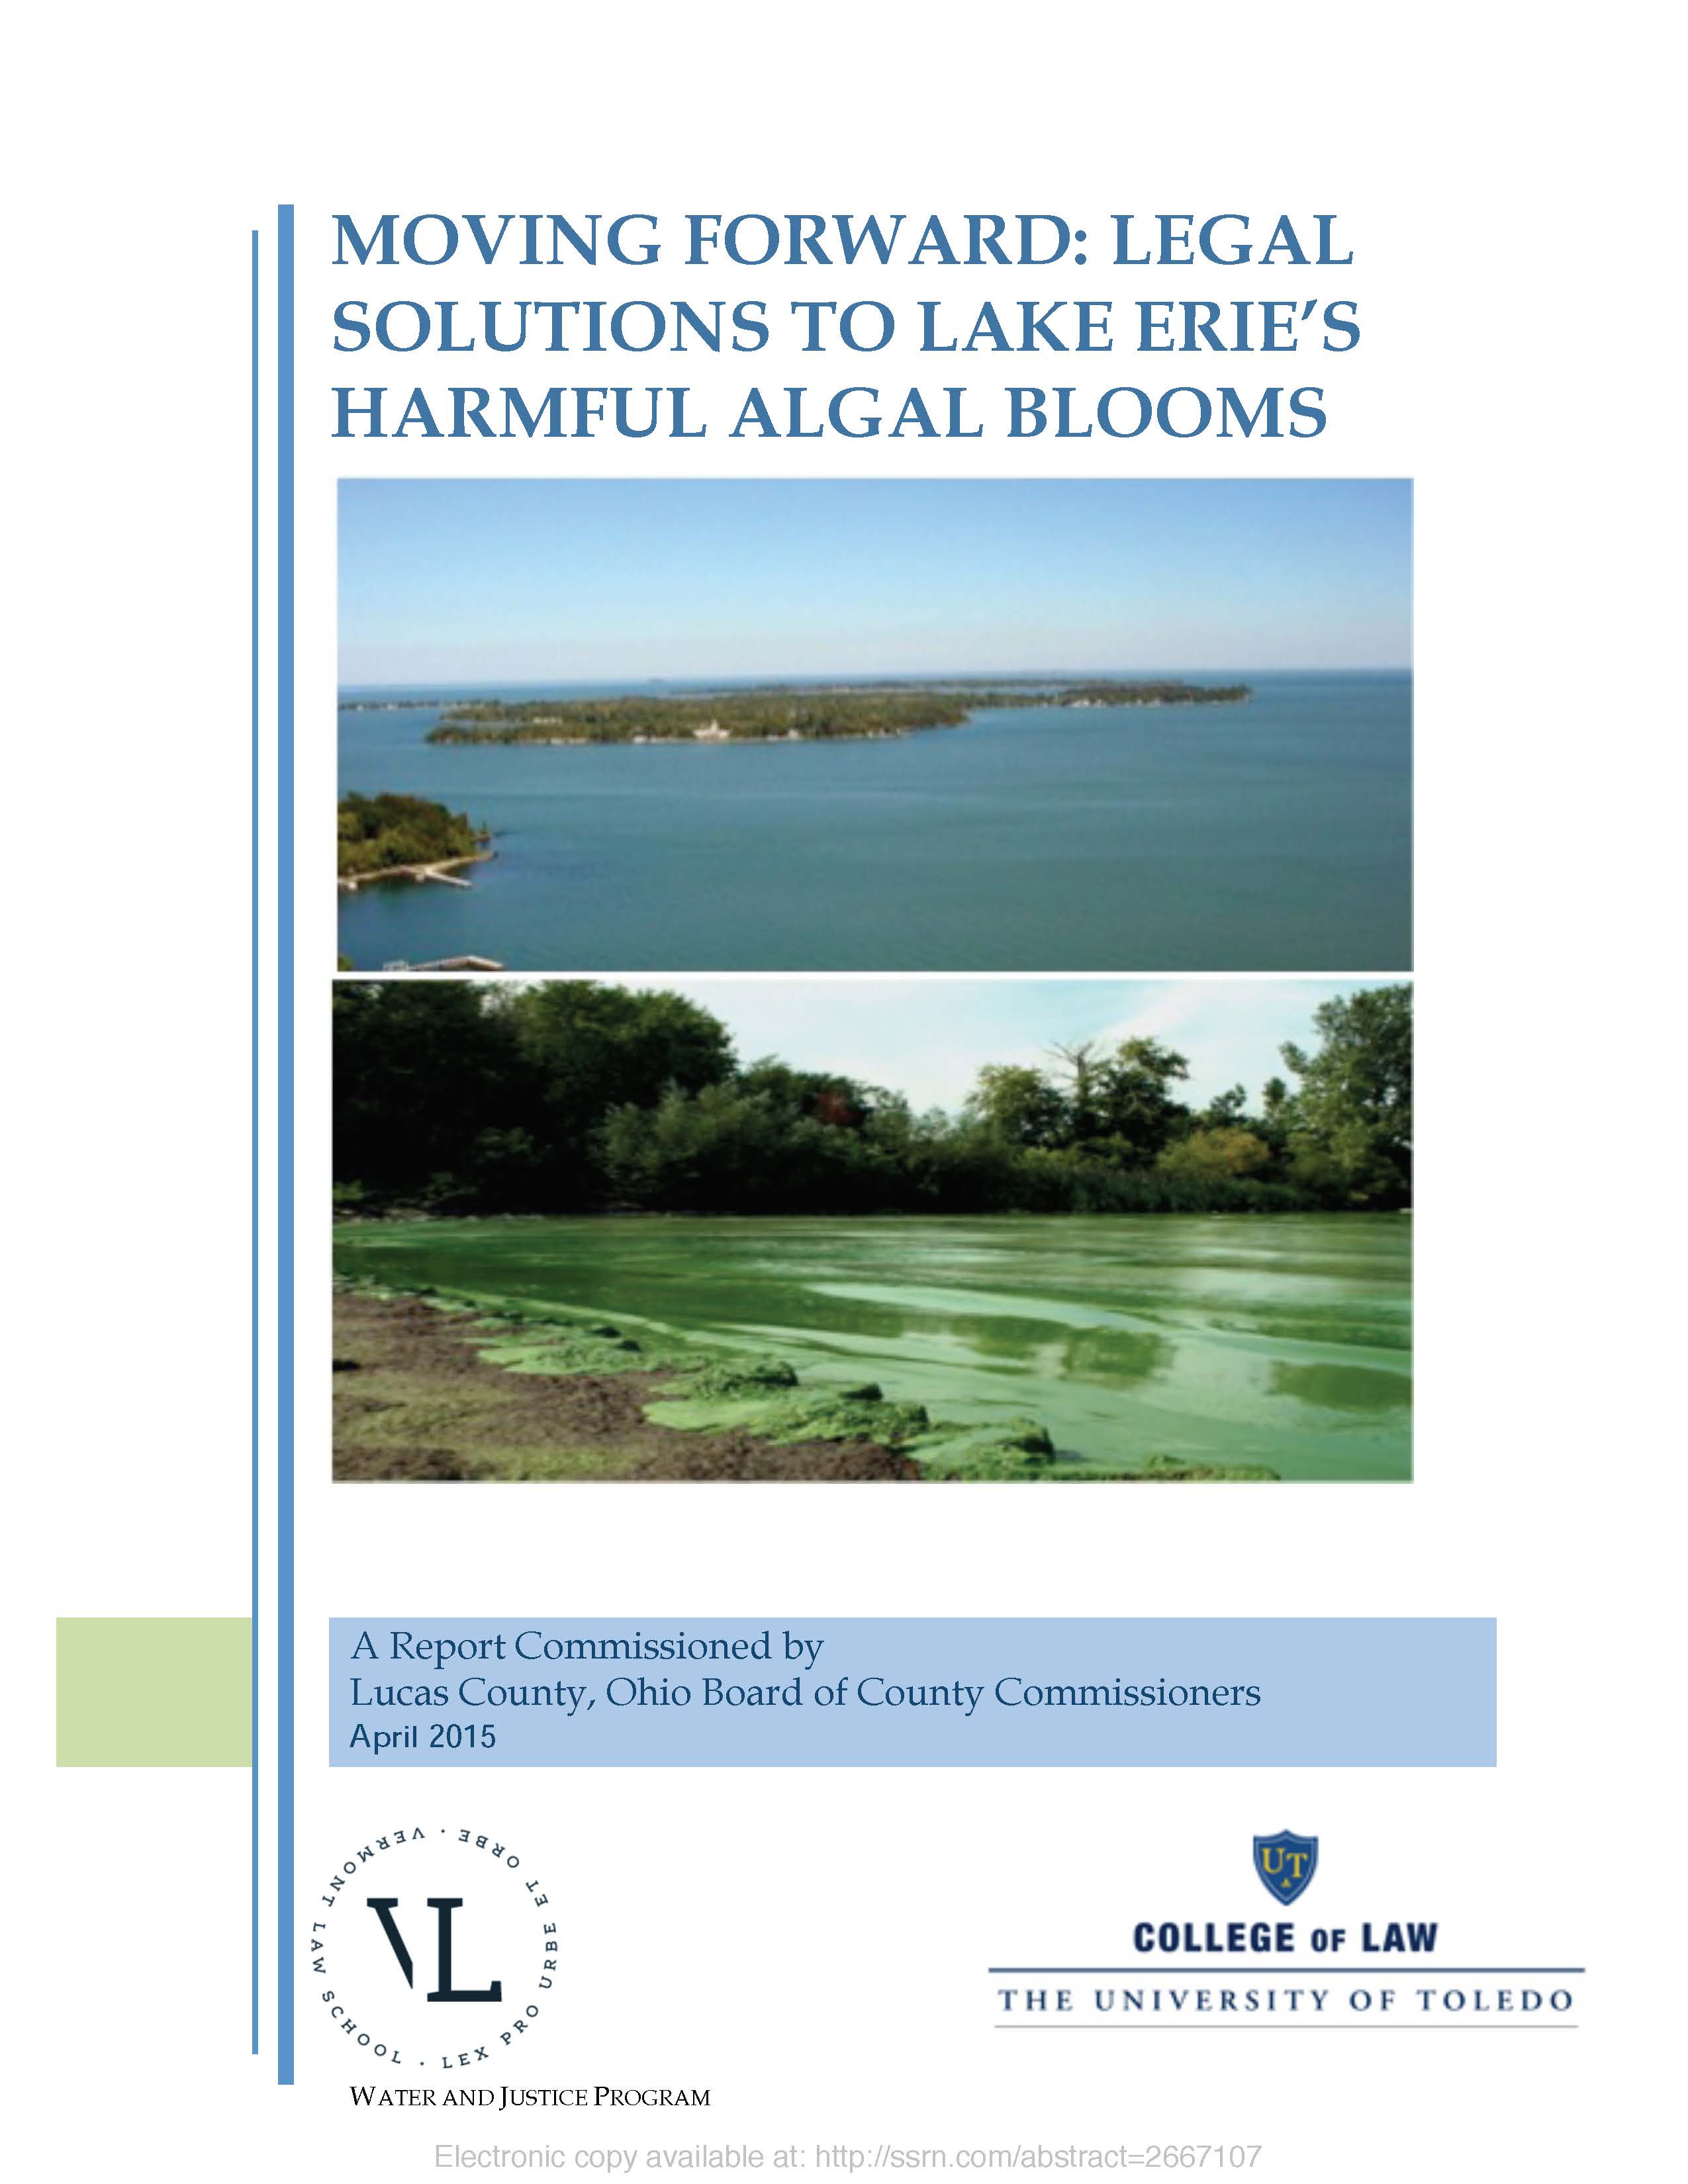 Moving Forward: Legal Solutions to Lake Erie's Harmful Algal Blooms